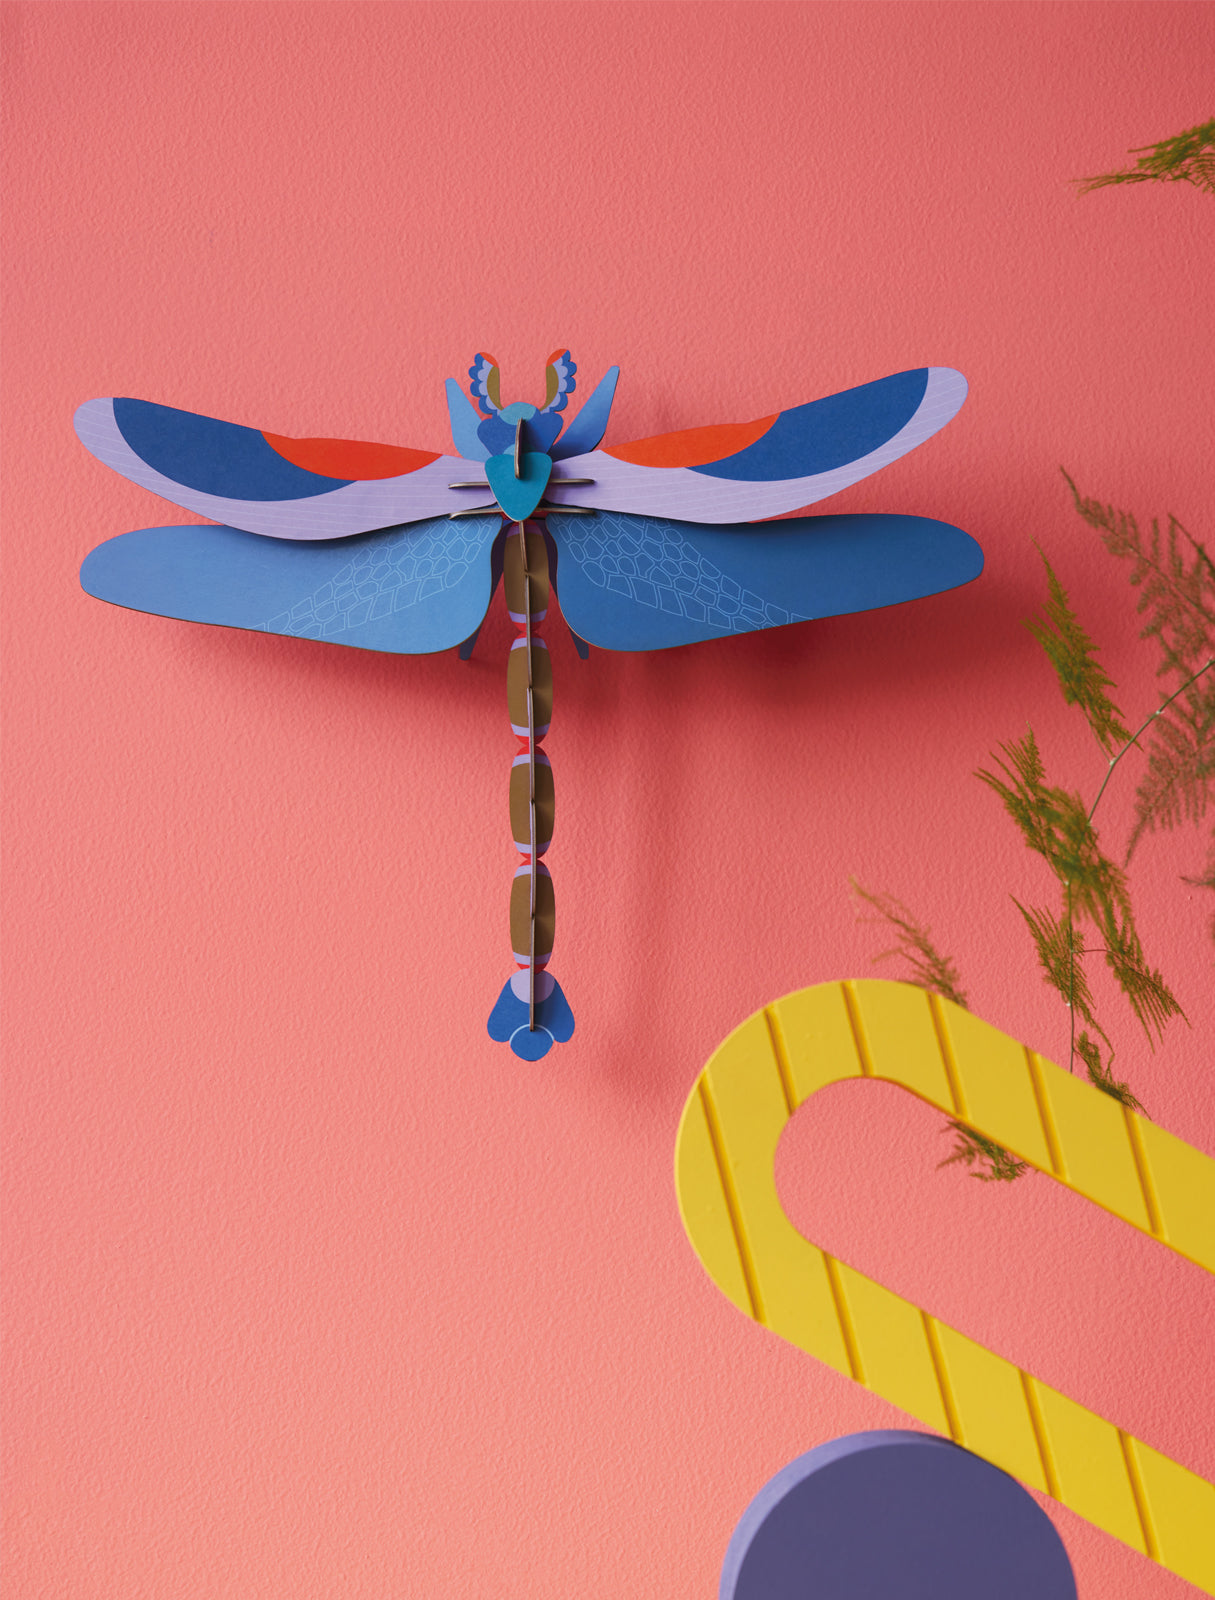 Deer Industries Lifestyle Store, Studio ROOF Singapore, Gift Store Singapore, 3D Wall Decor Big insects blue dragonfly, Insects lover, 3D Vibrant Wall Art